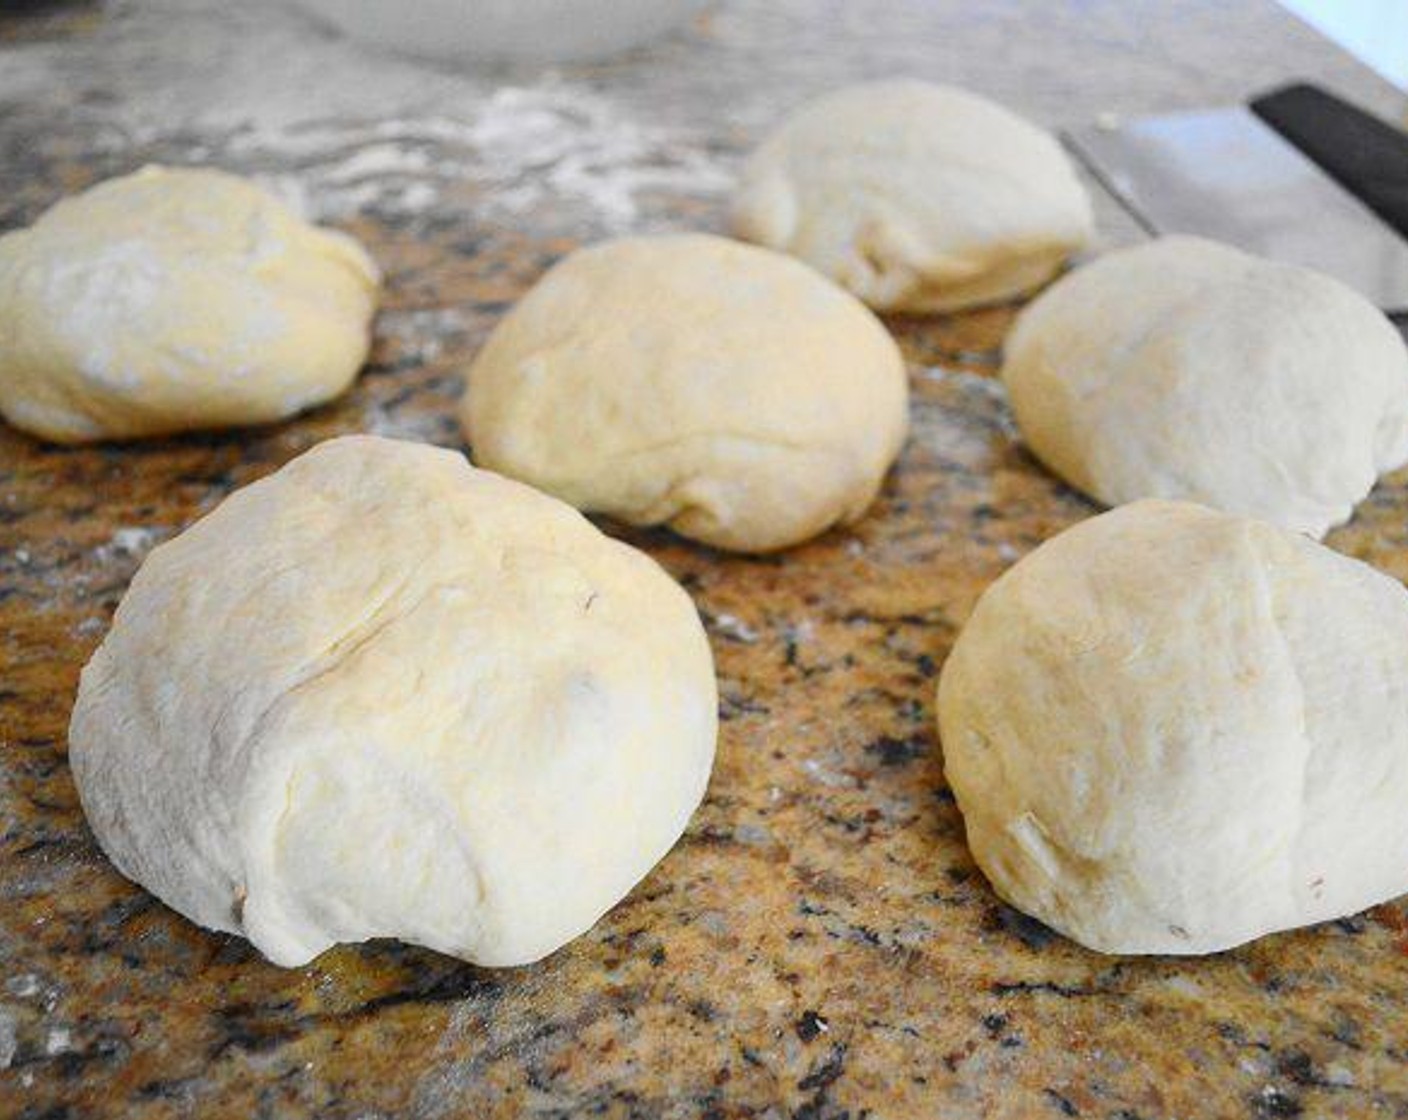 step 5 When you are ready to use it, divide it up and roll it out however you desire! Pizza, calzones, stromboli, the possibilities are endless! Enjoy!